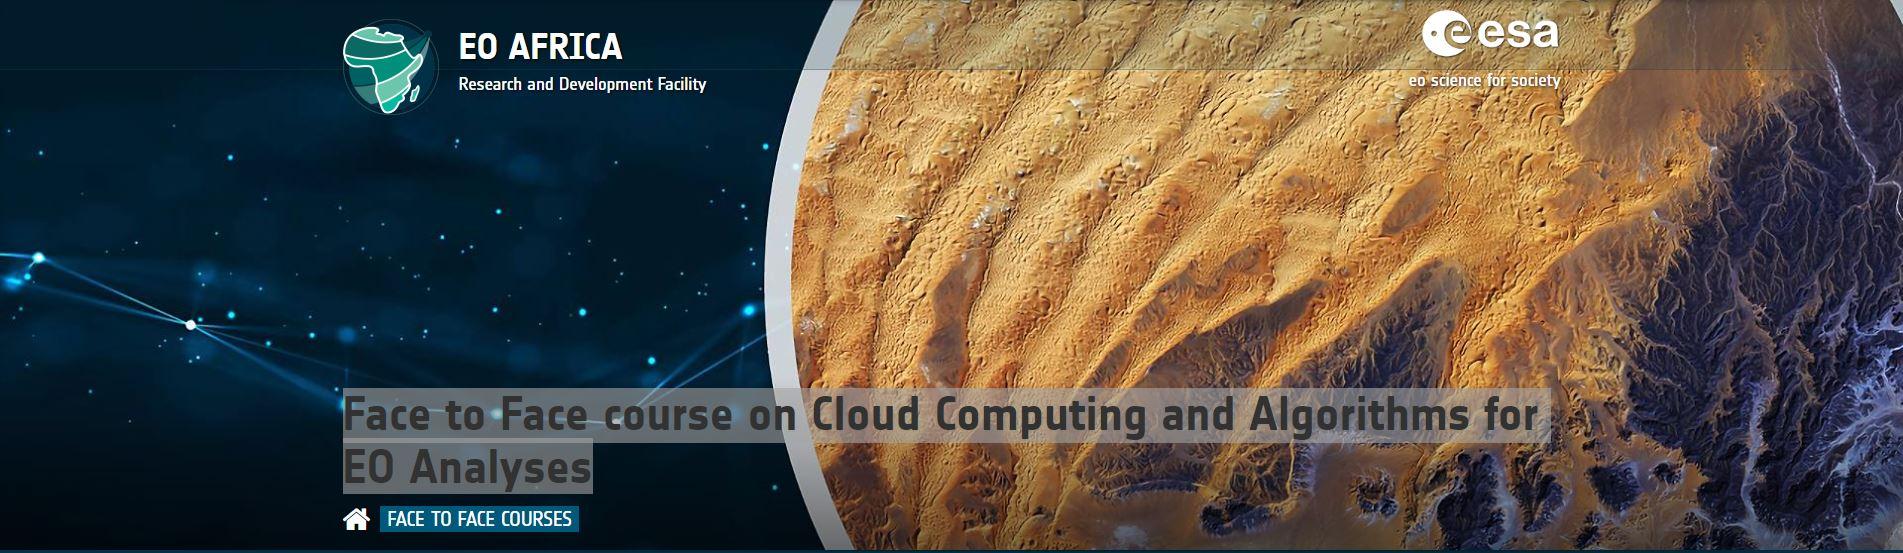 Face to Face course on Cloud Computing and Algorithms for EO Analyses